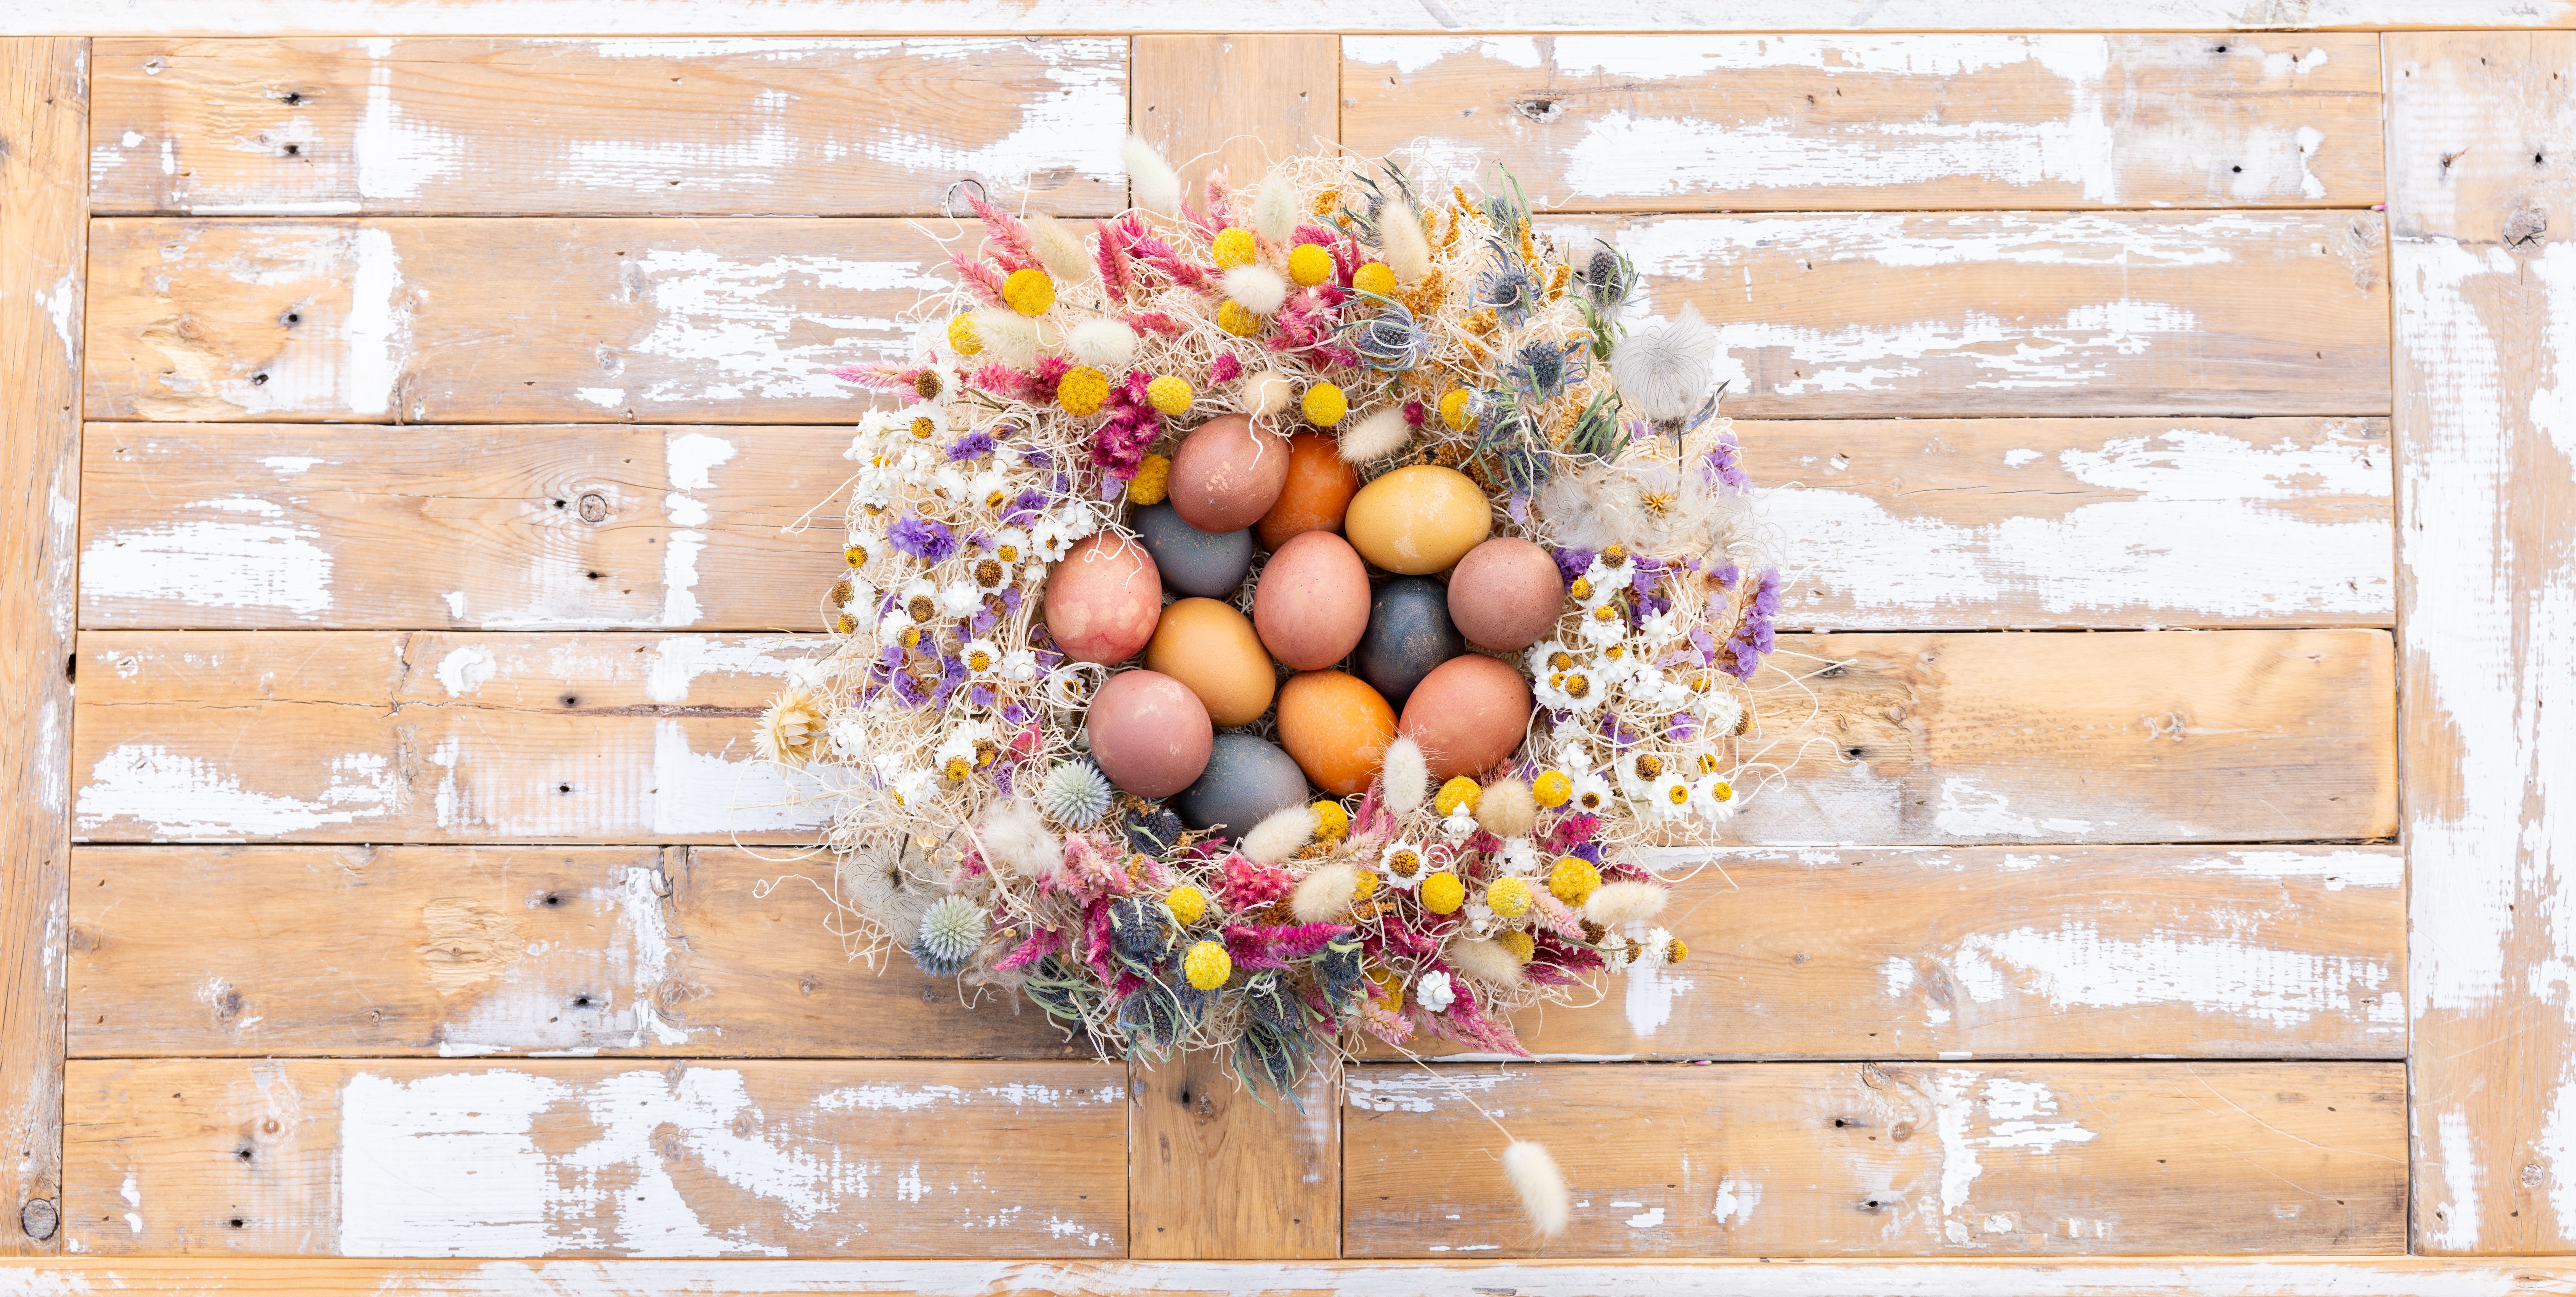 Rootstock, Simple Steps to Dye Easter Eggs With Natural Ingredients